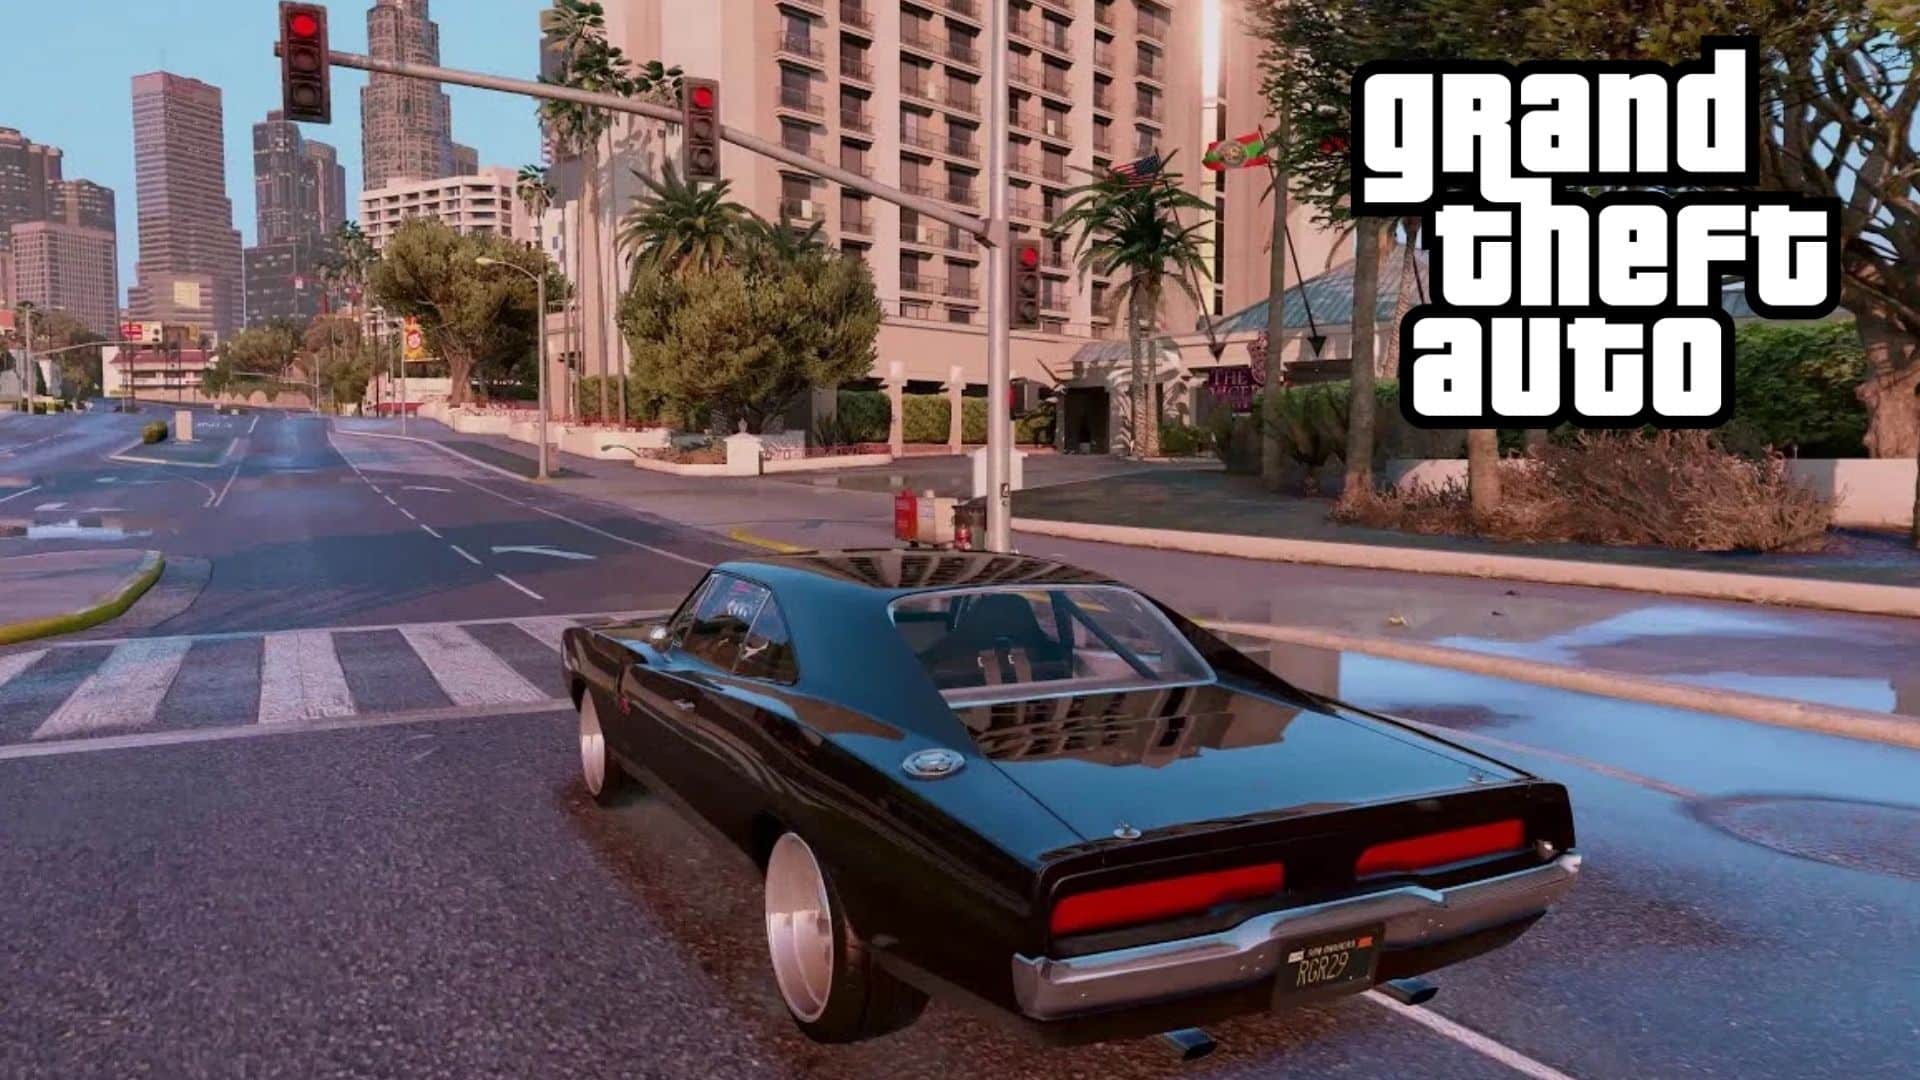 Who leaked the recent GTA 6 leak?